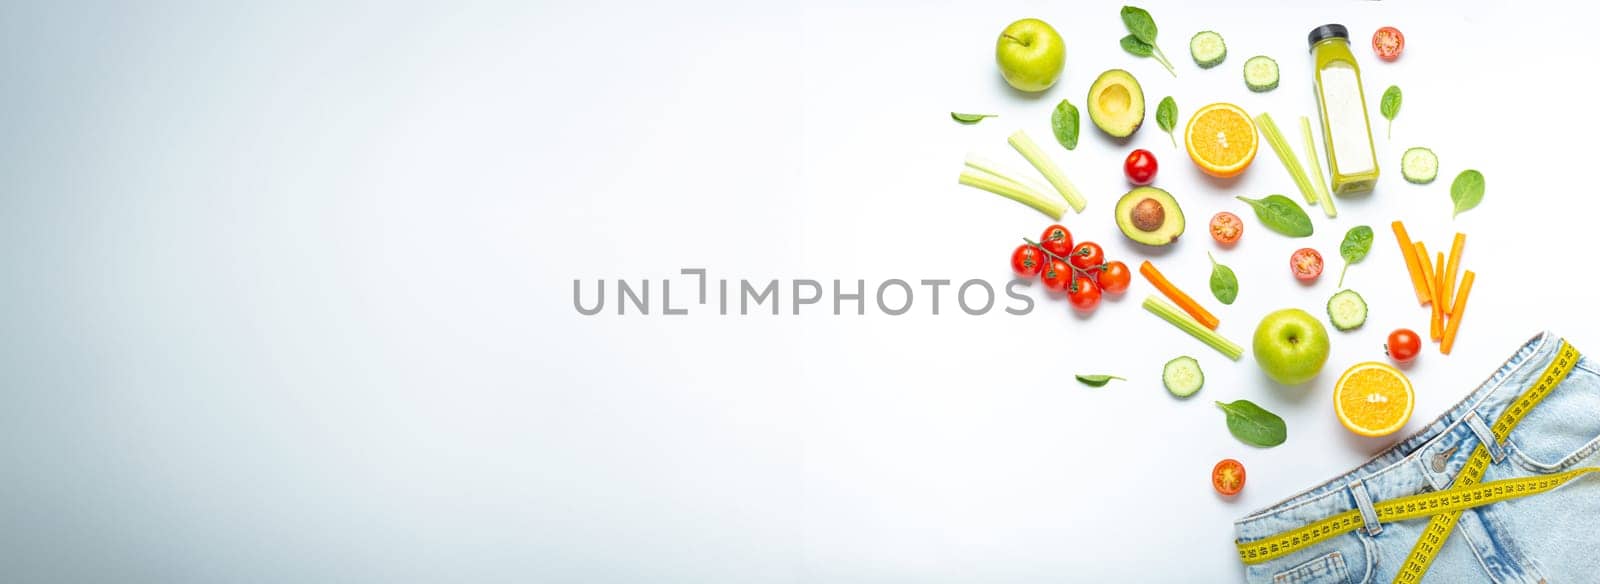 Fresh fruit, vegetables, smoothie falling into jeans and yellow measuring tape instead of belt on white background. Concept of weight loss, detox, diet, healthy clean nutrition, space for text by its_al_dente